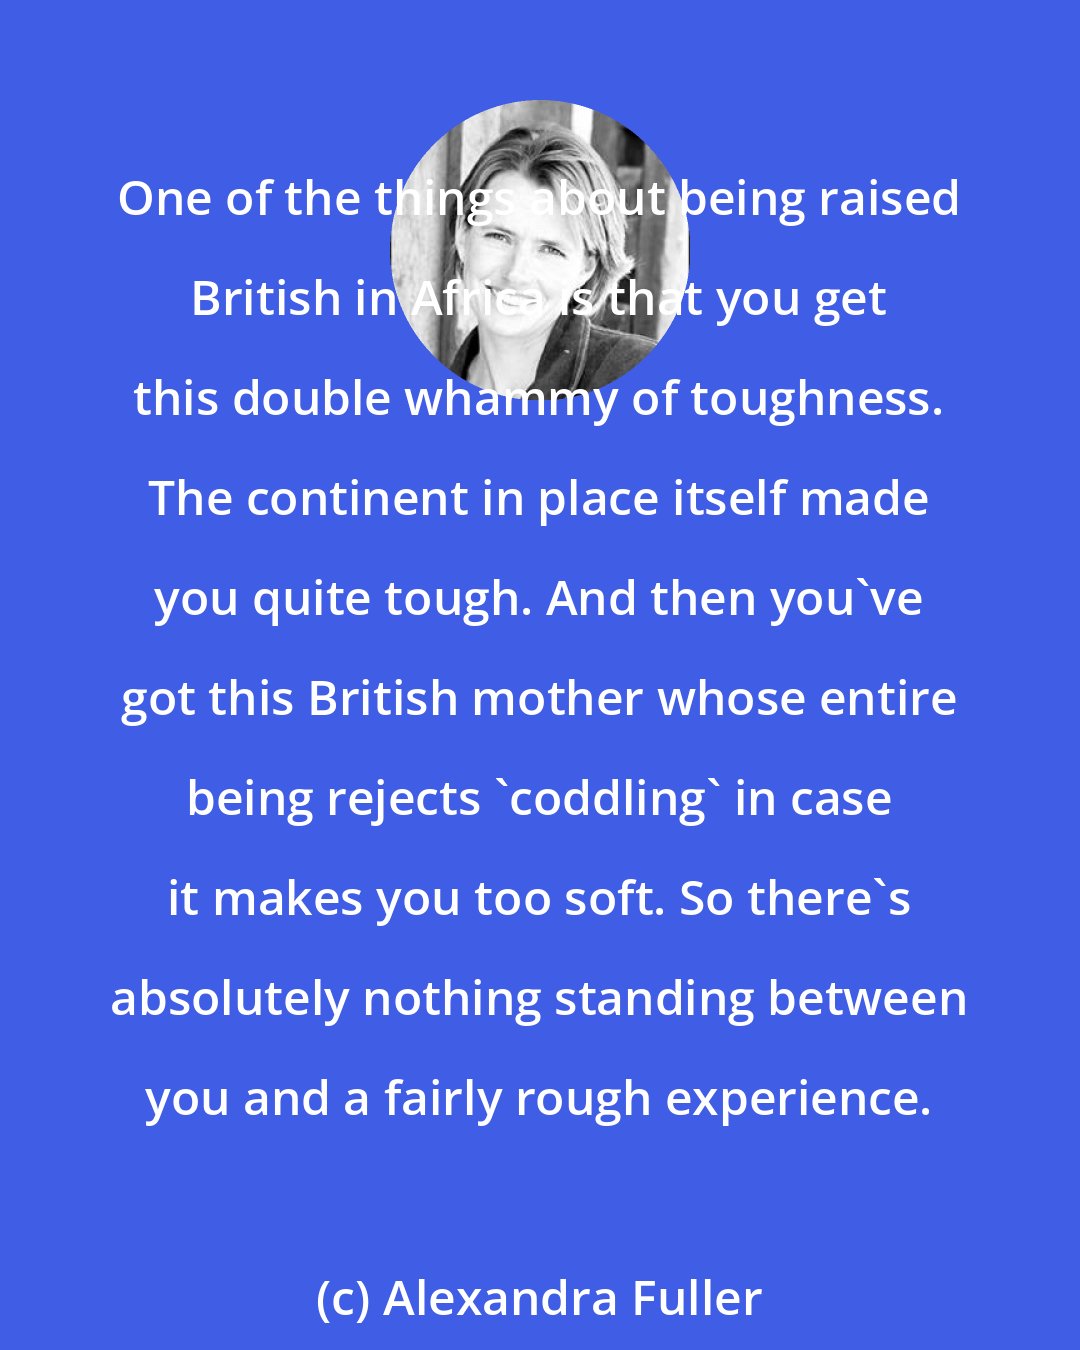 Alexandra Fuller: One of the things about being raised British in Africa is that you get this double whammy of toughness. The continent in place itself made you quite tough. And then you've got this British mother whose entire being rejects 'coddling' in case it makes you too soft. So there's absolutely nothing standing between you and a fairly rough experience.